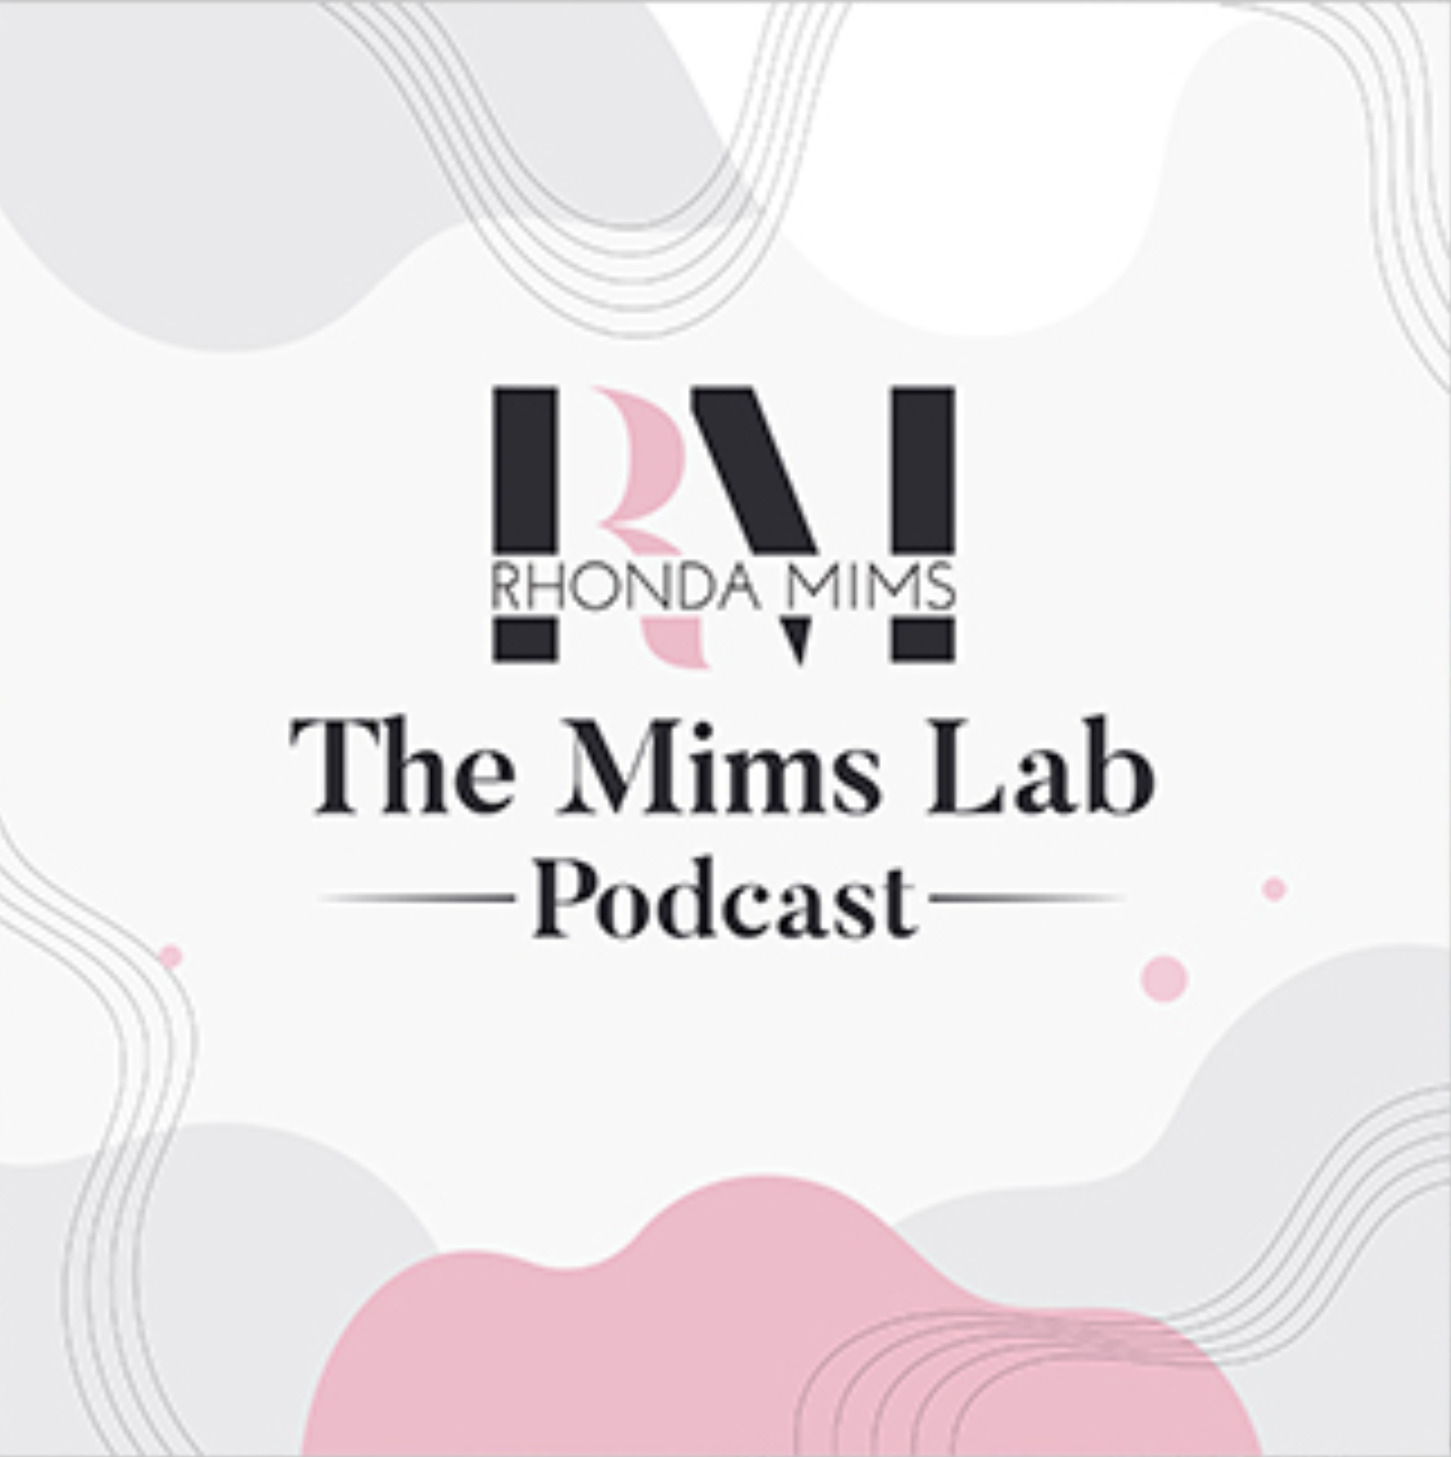 The Mims Lab Podcast cover photo. The Rhonda Mims logo is positioned right above the title. In the background there are grey and pink wavy modern design elements.